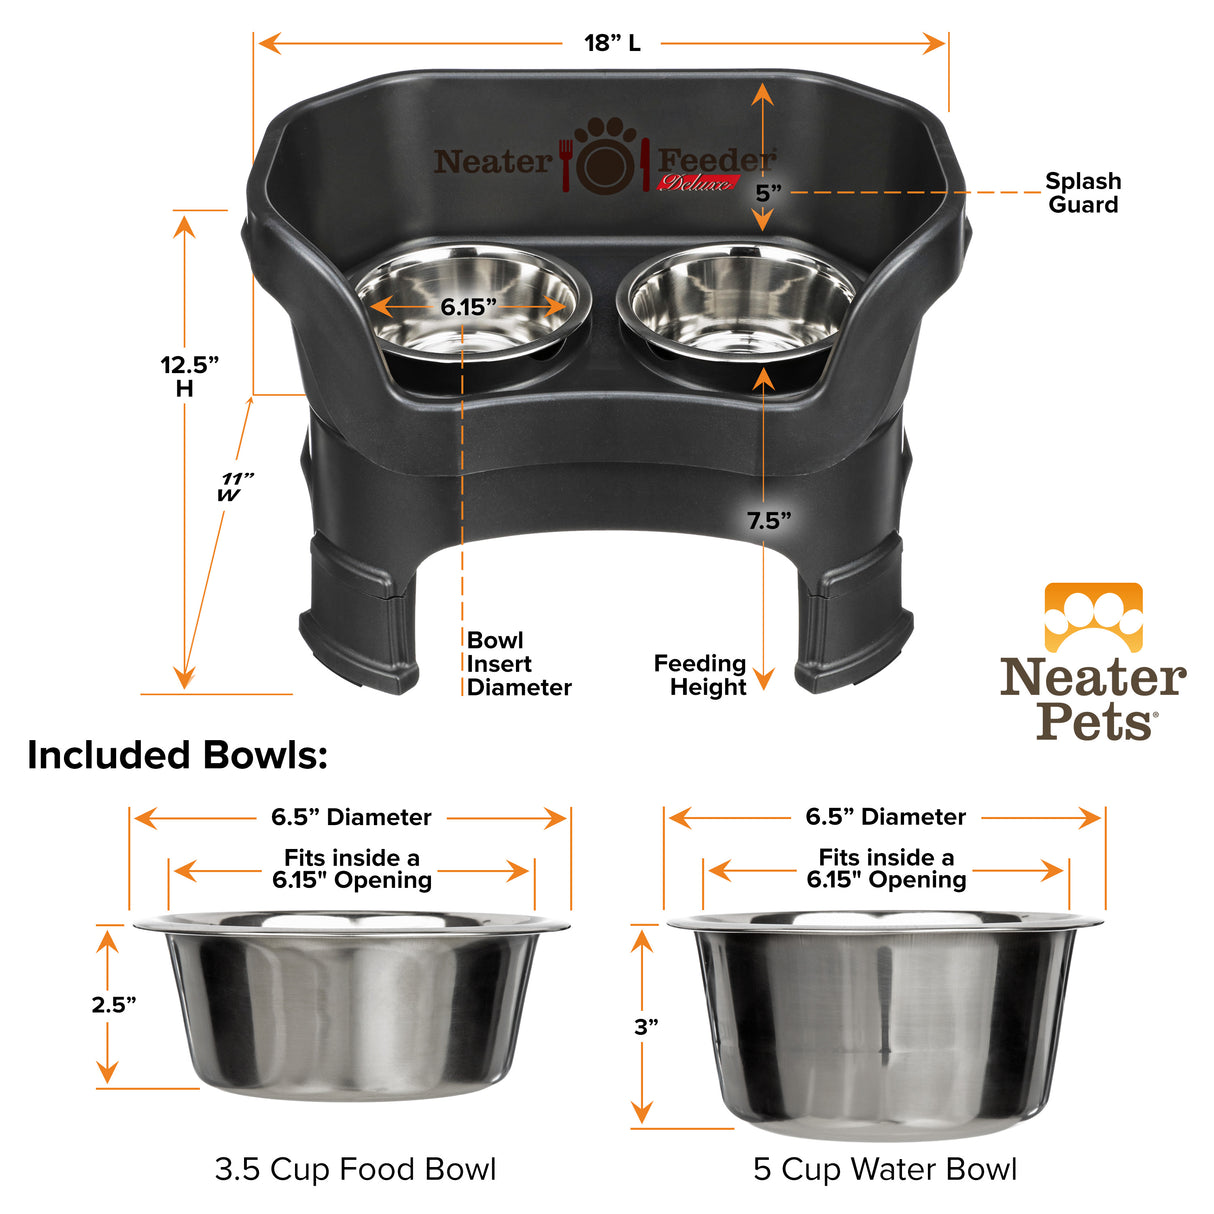 Deluxe Midnight Black Medium Dog Neater Feeder with leg extensions and Bowl dimensions